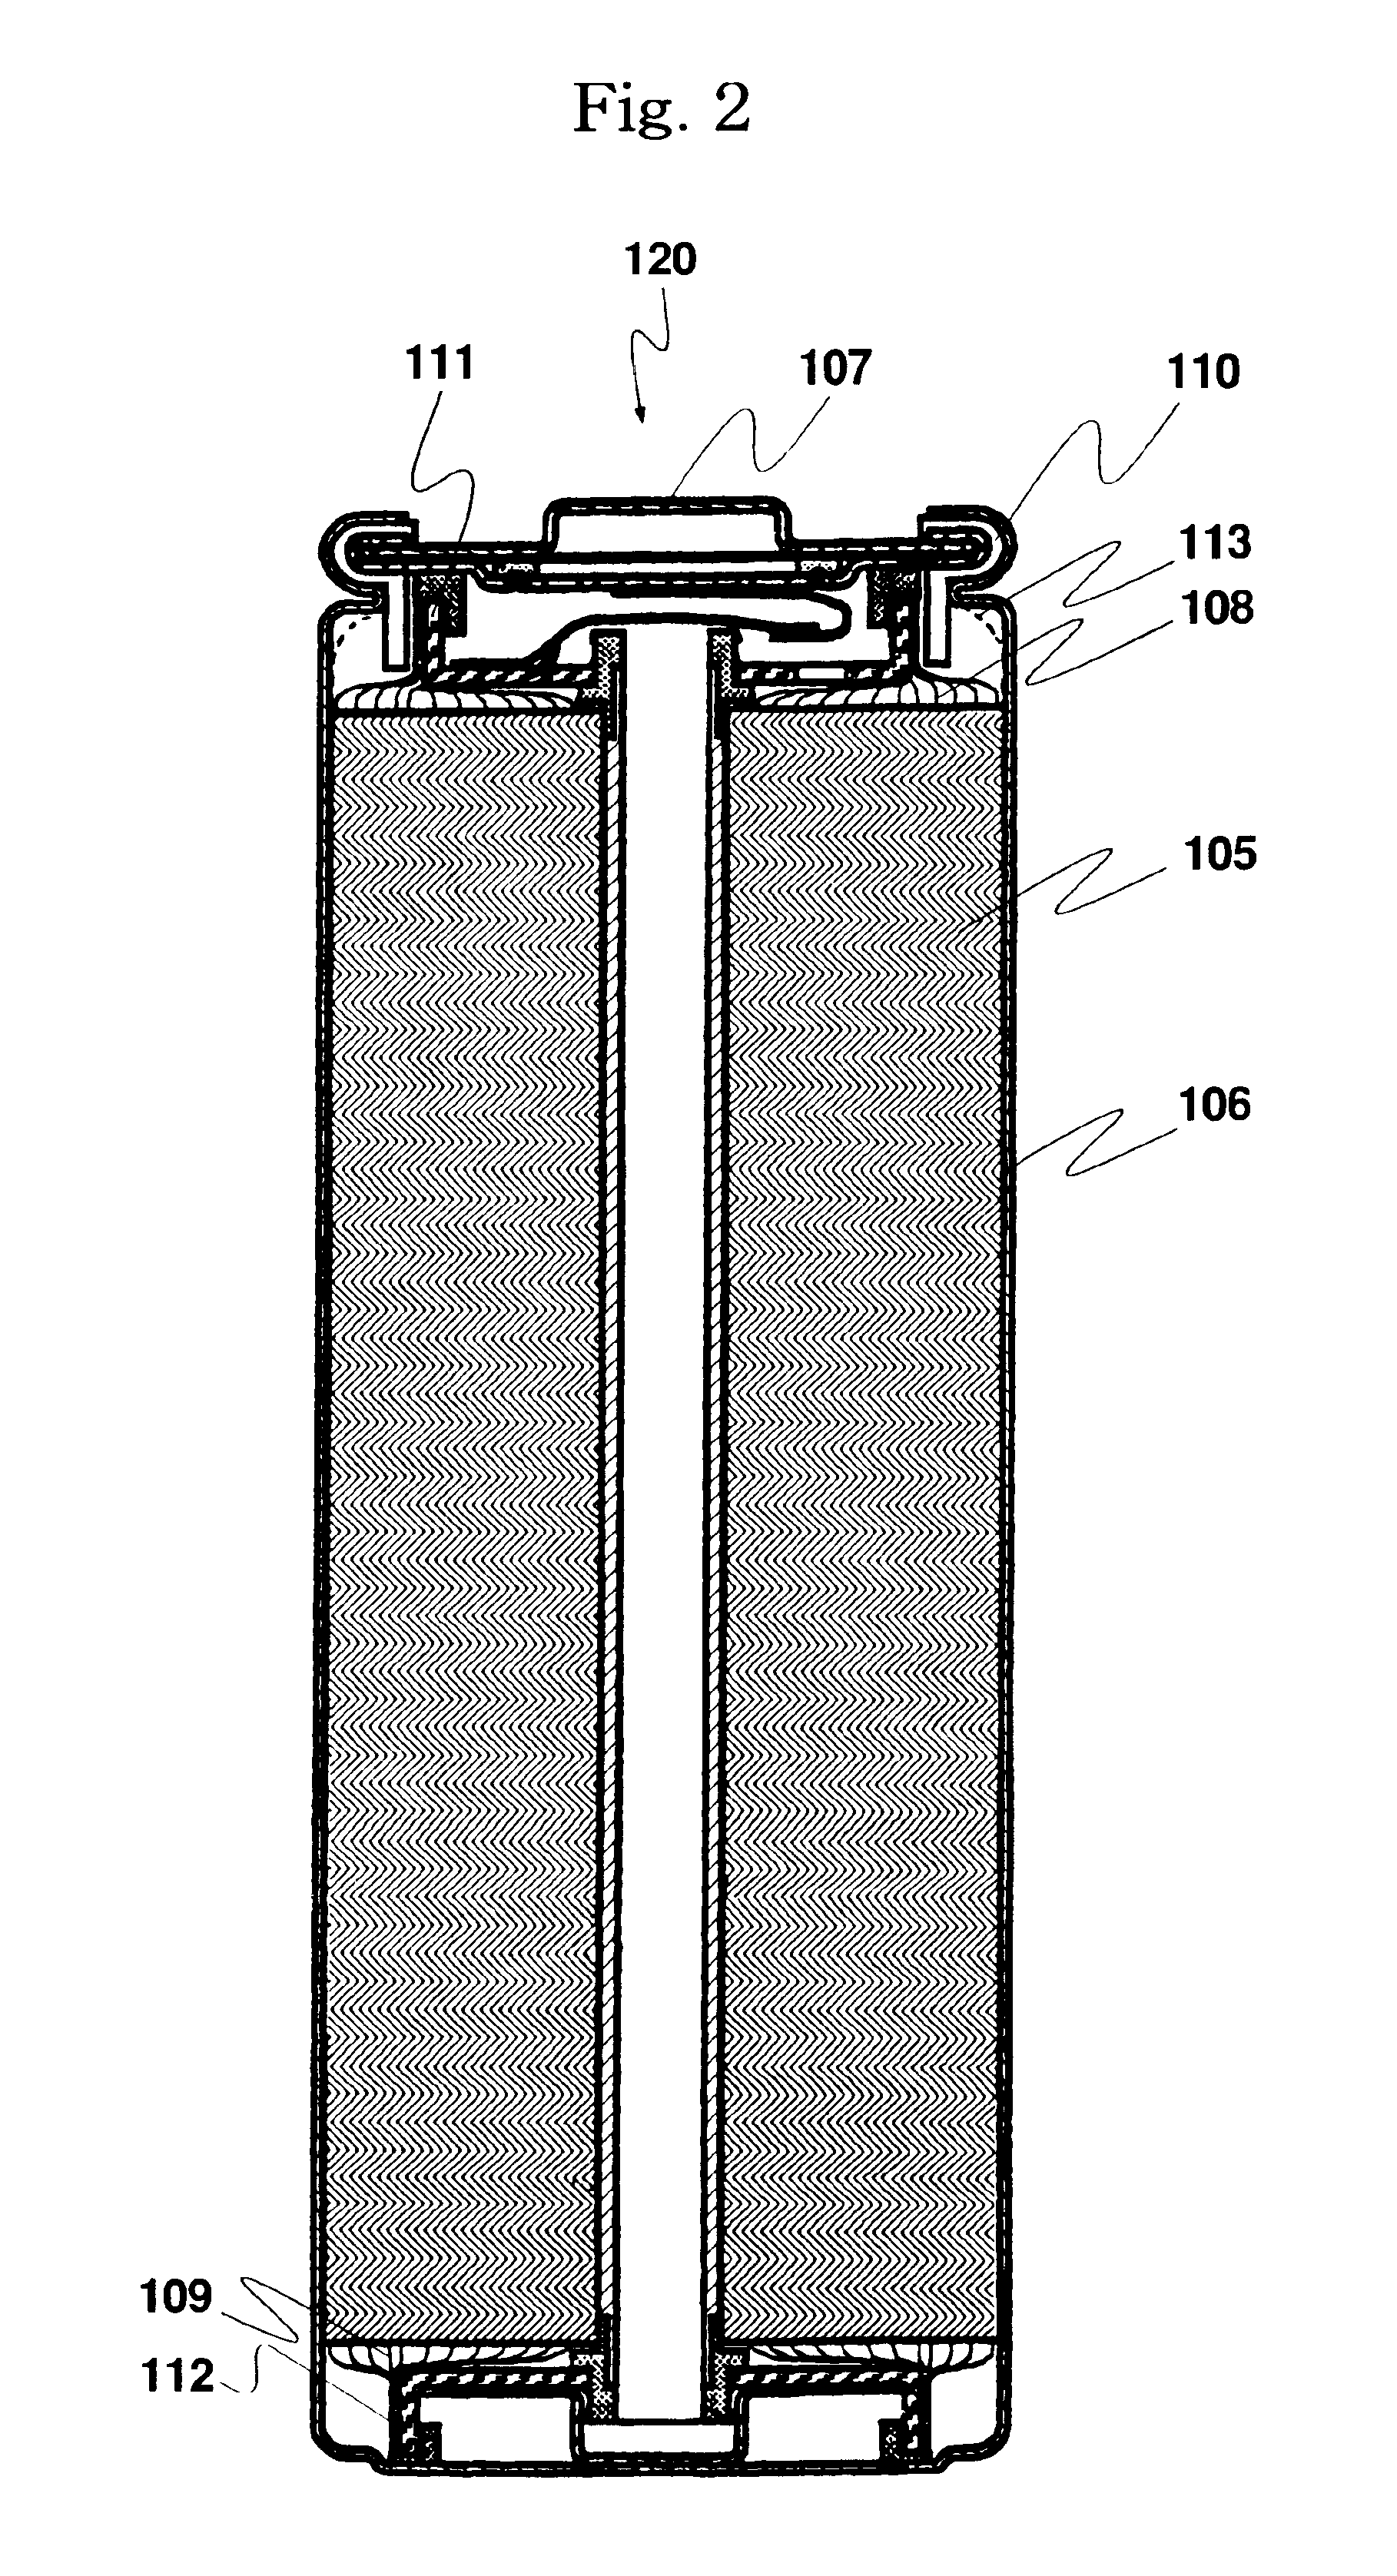 Non-aqueous electrolytic solution secondary battery with electrodes having a specific thickness and porosity